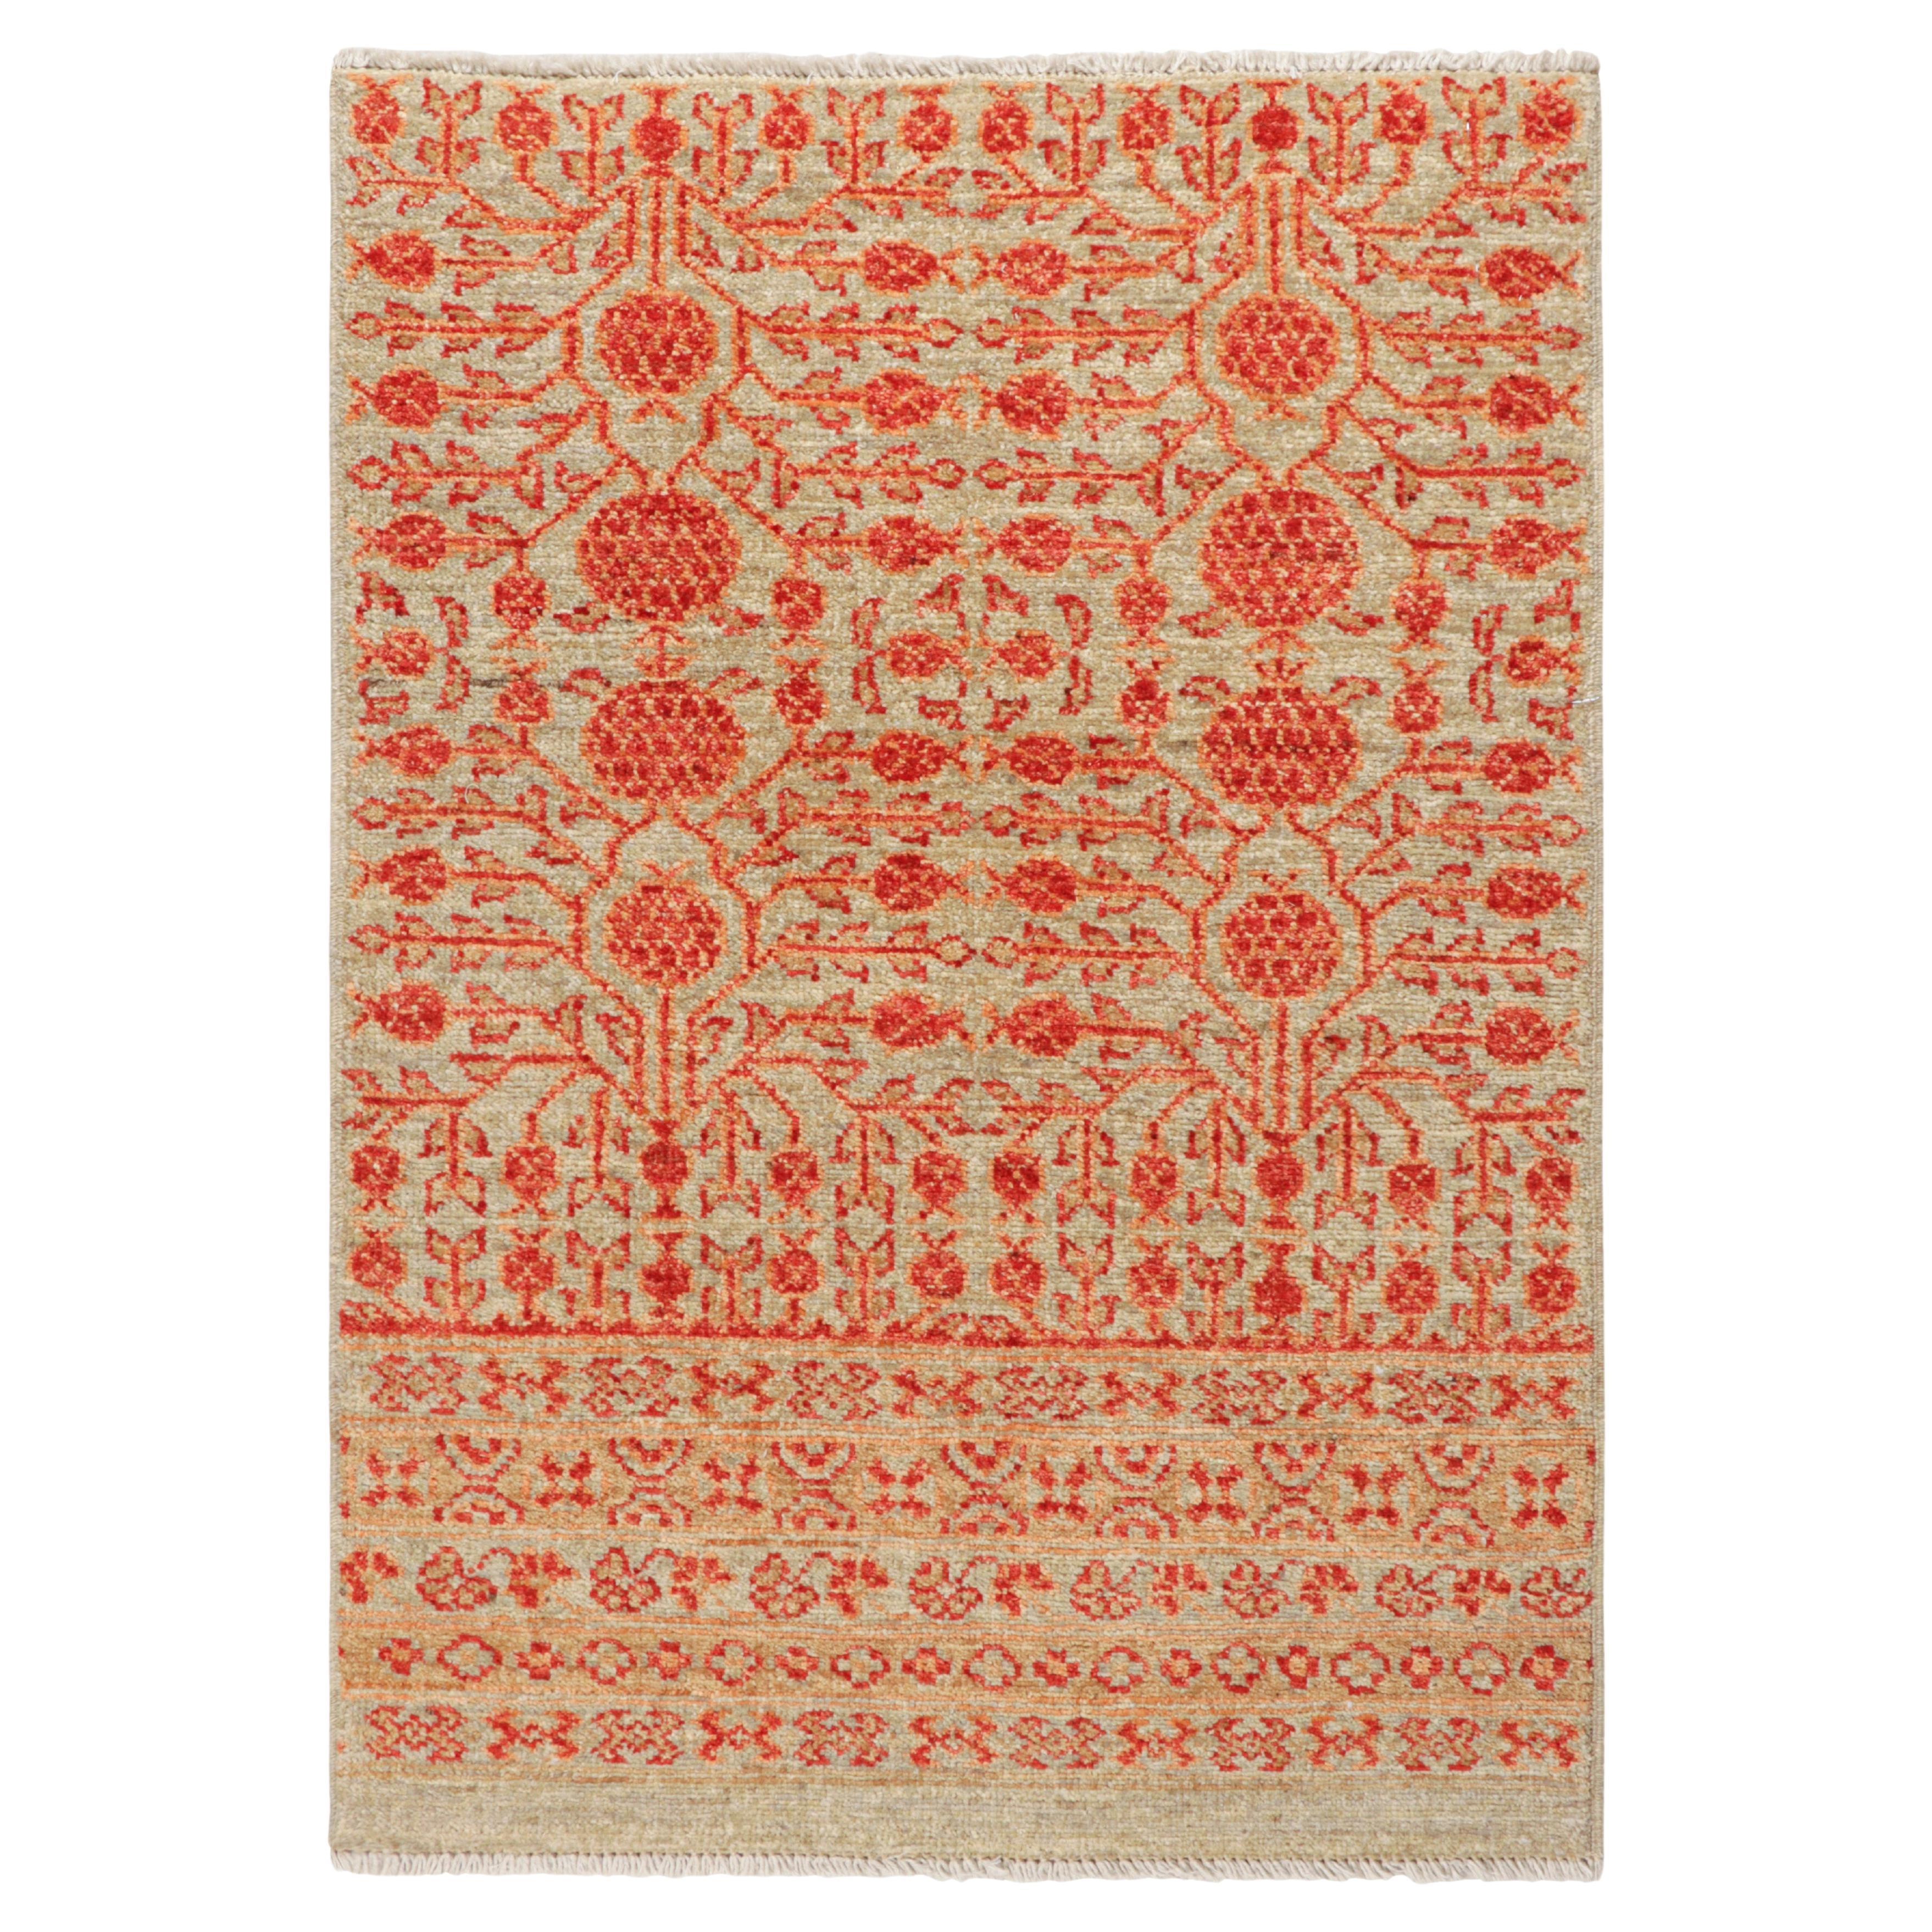 Rug & Kilim’s Khotan Style Rug in Beige-Brown with Pomegranate Patterns For Sale